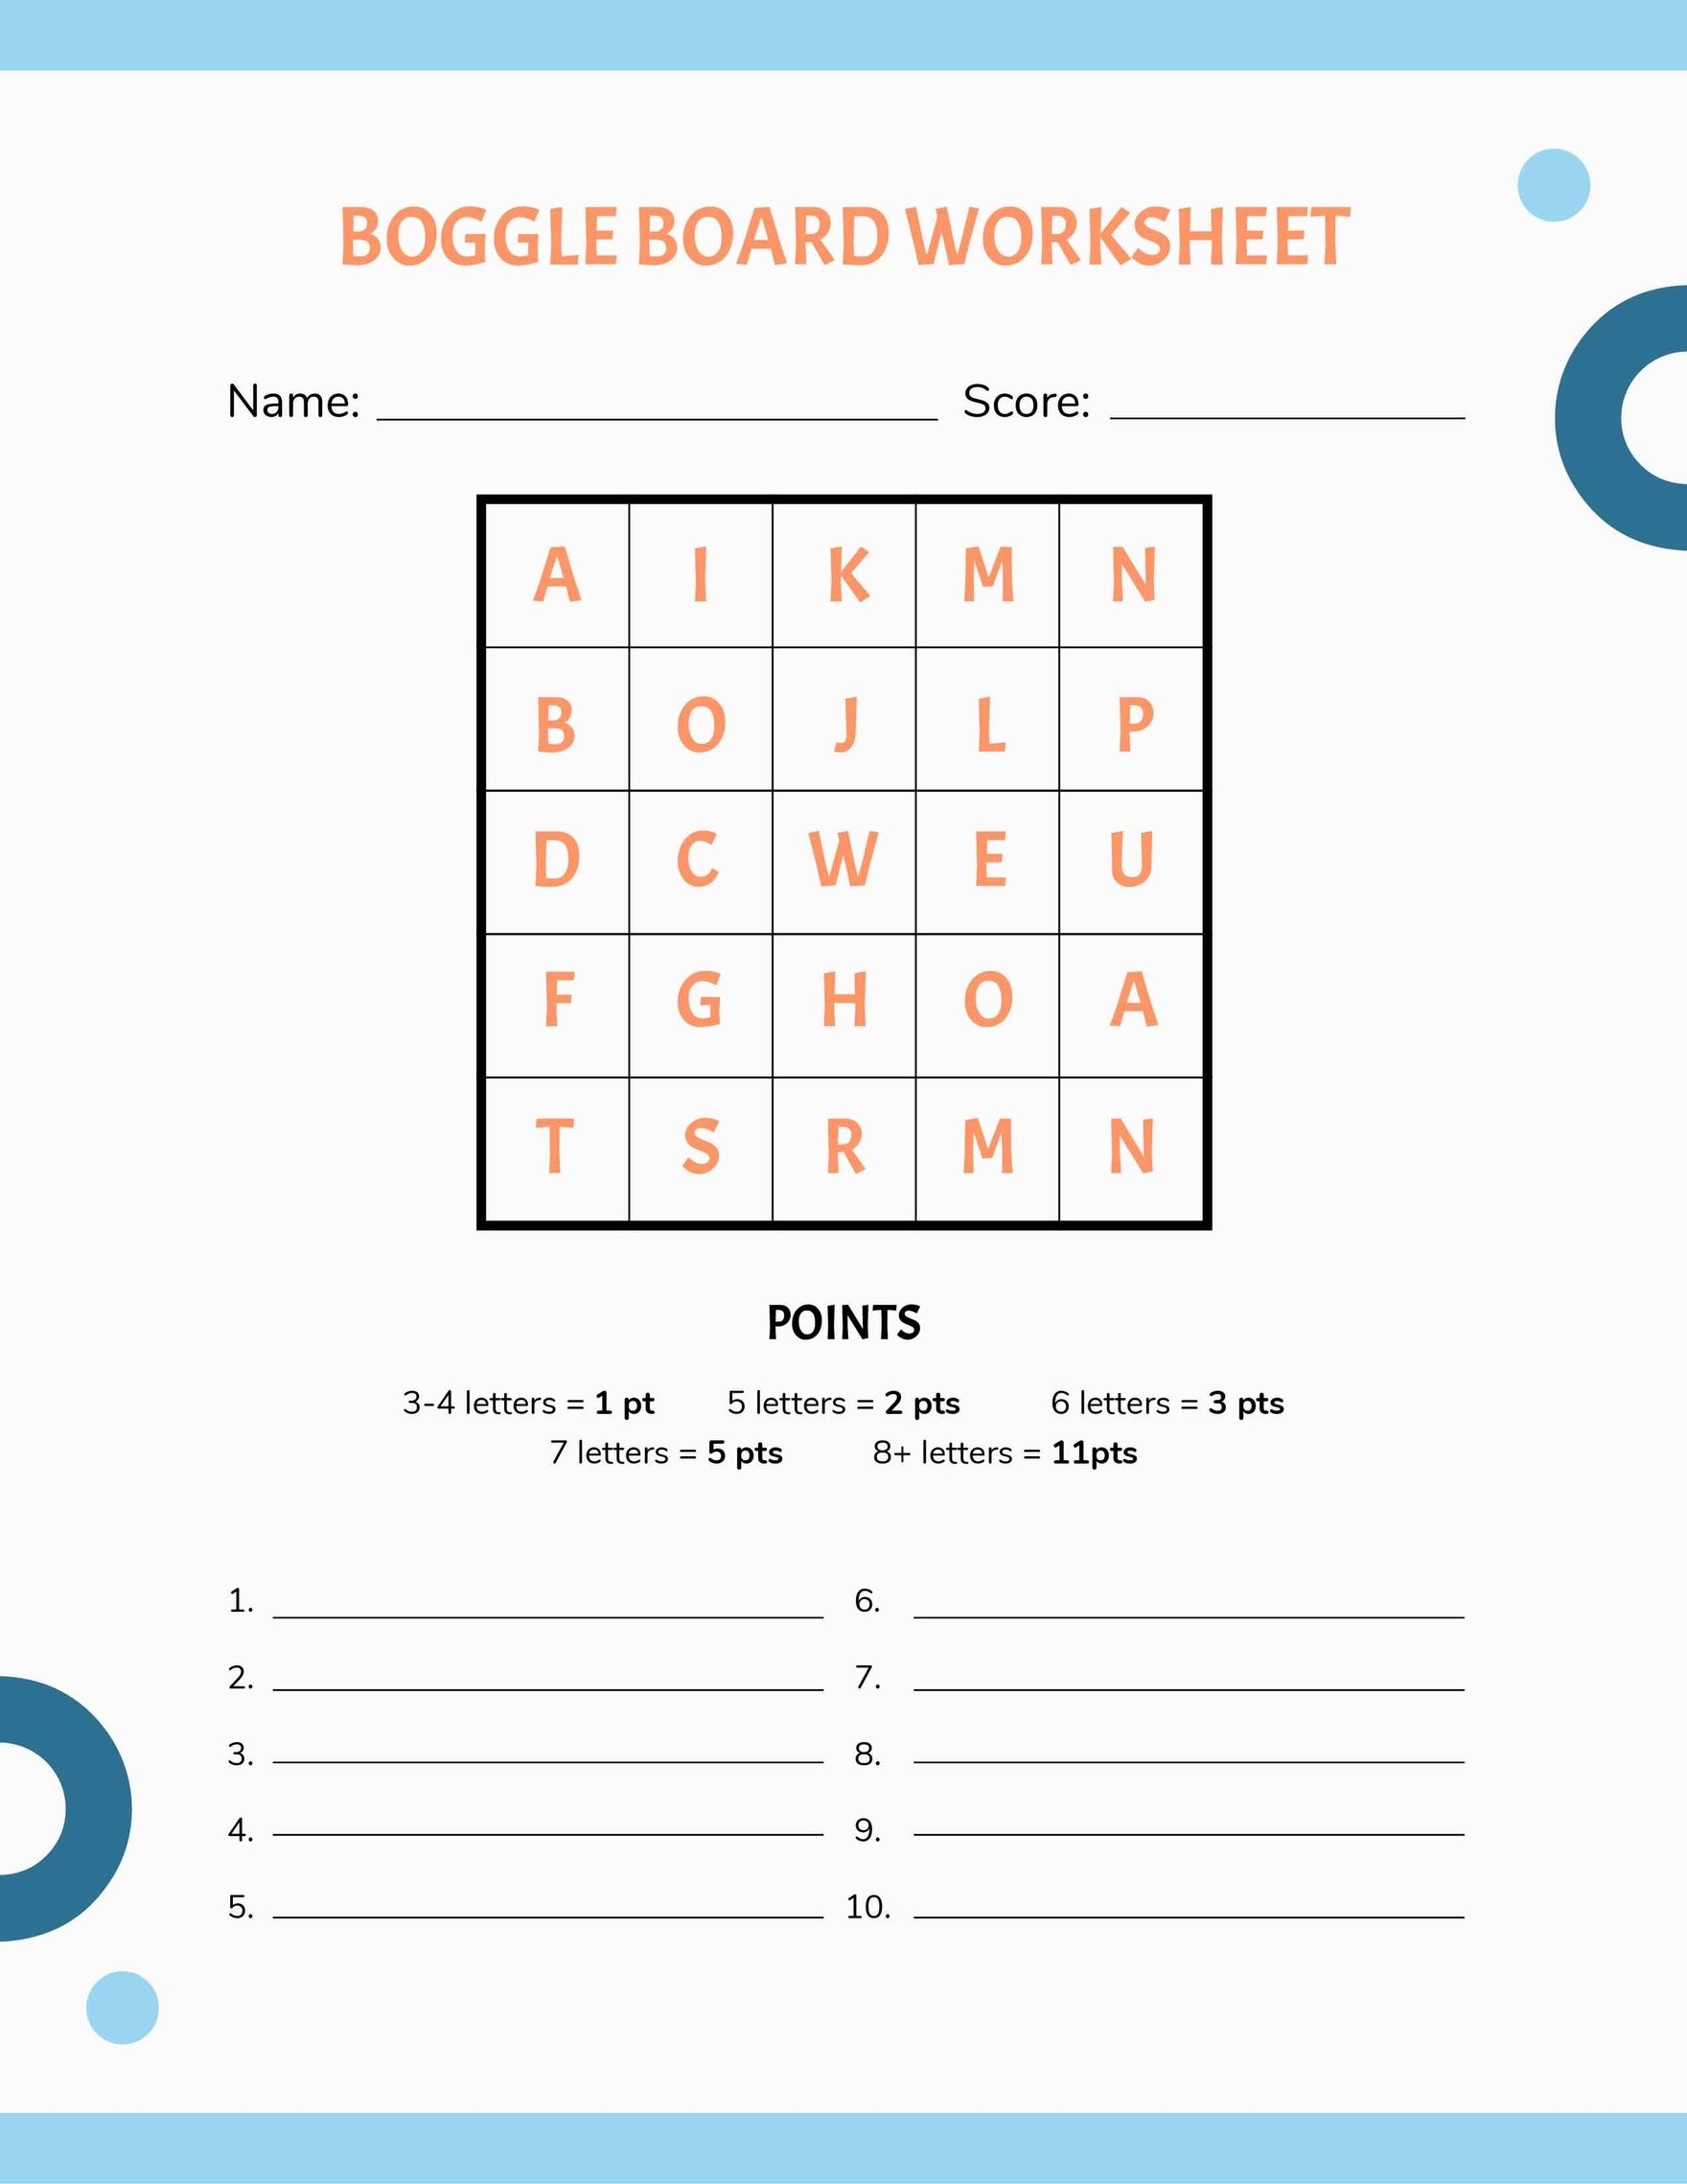 Boggle Board Worksheet Template in Word, Google Docs, PDF, Apple Pages